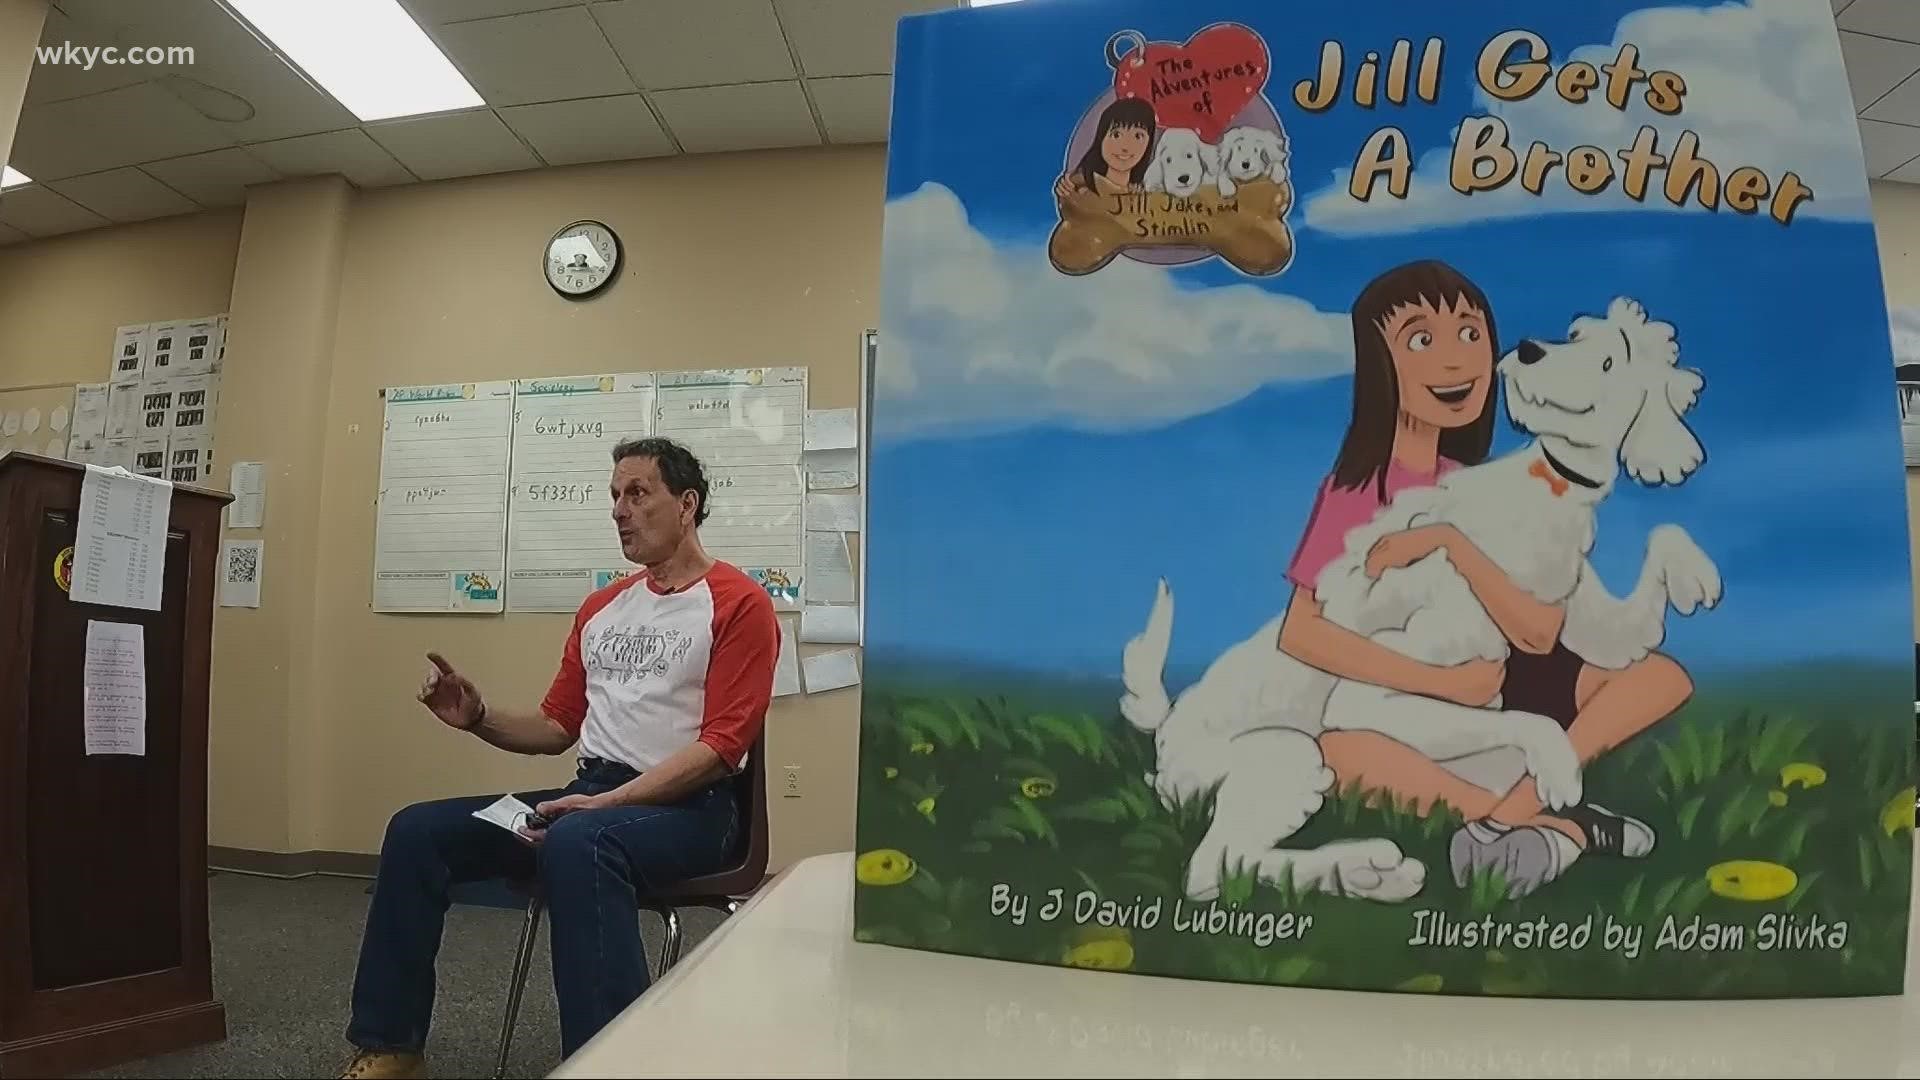 Dave Lubinger and his one-time art student Adam Slivka have partnered to release a series of children's books aimed at helping animal shelters.